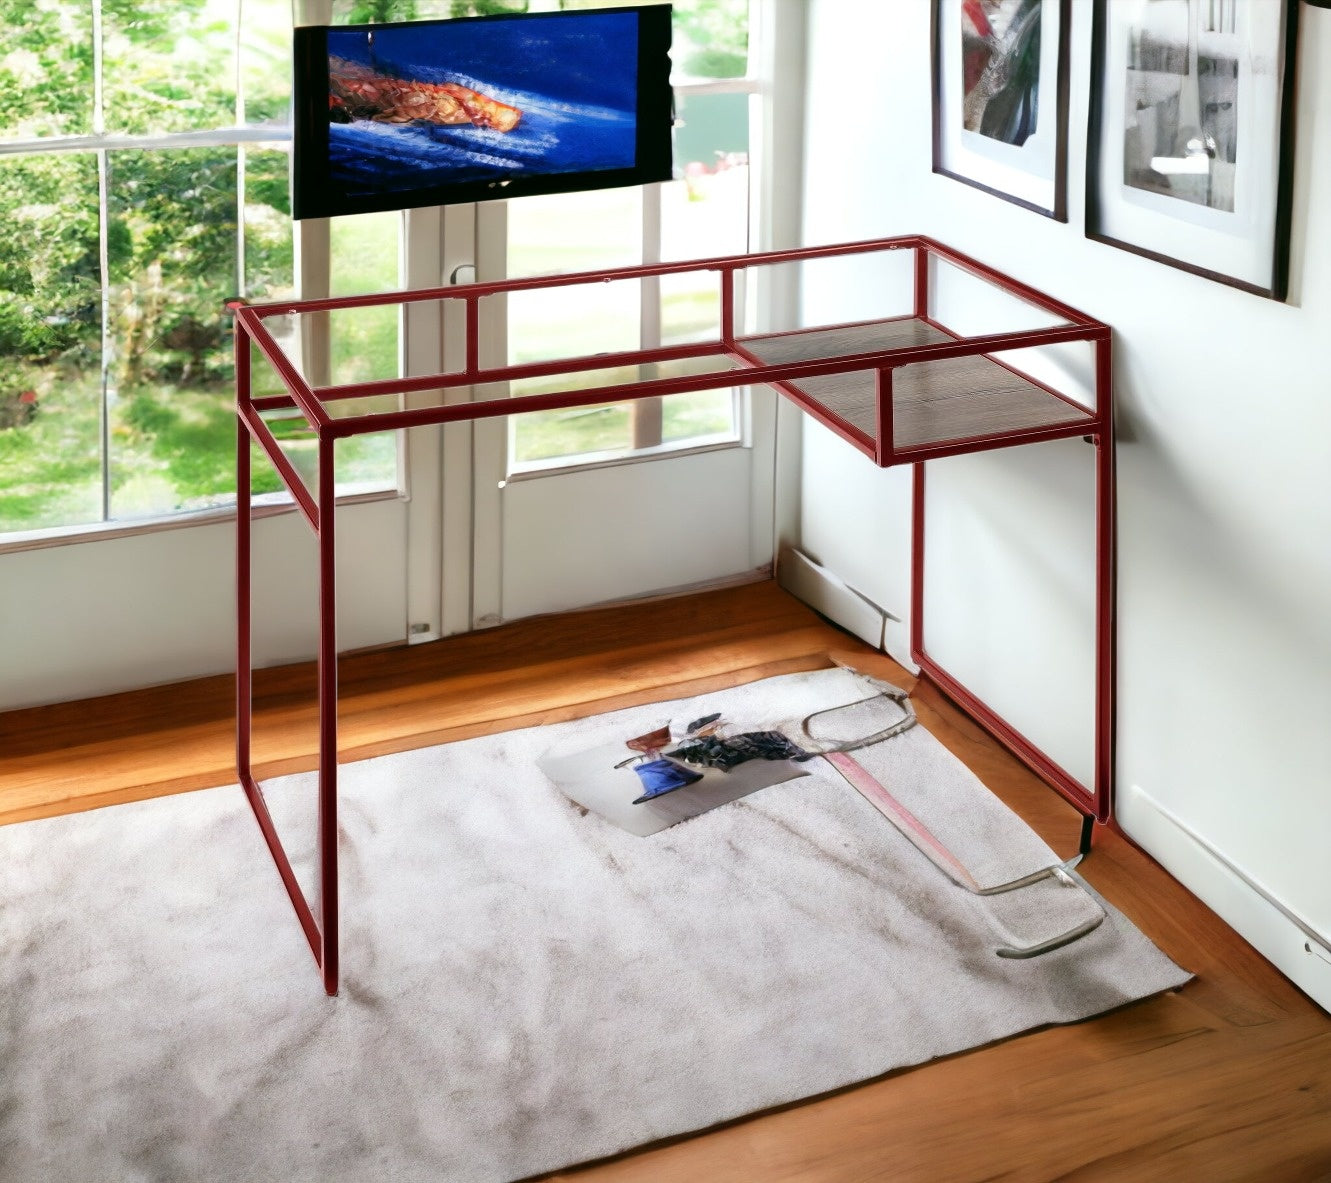 48" Clear and Red Glass Writing Desk